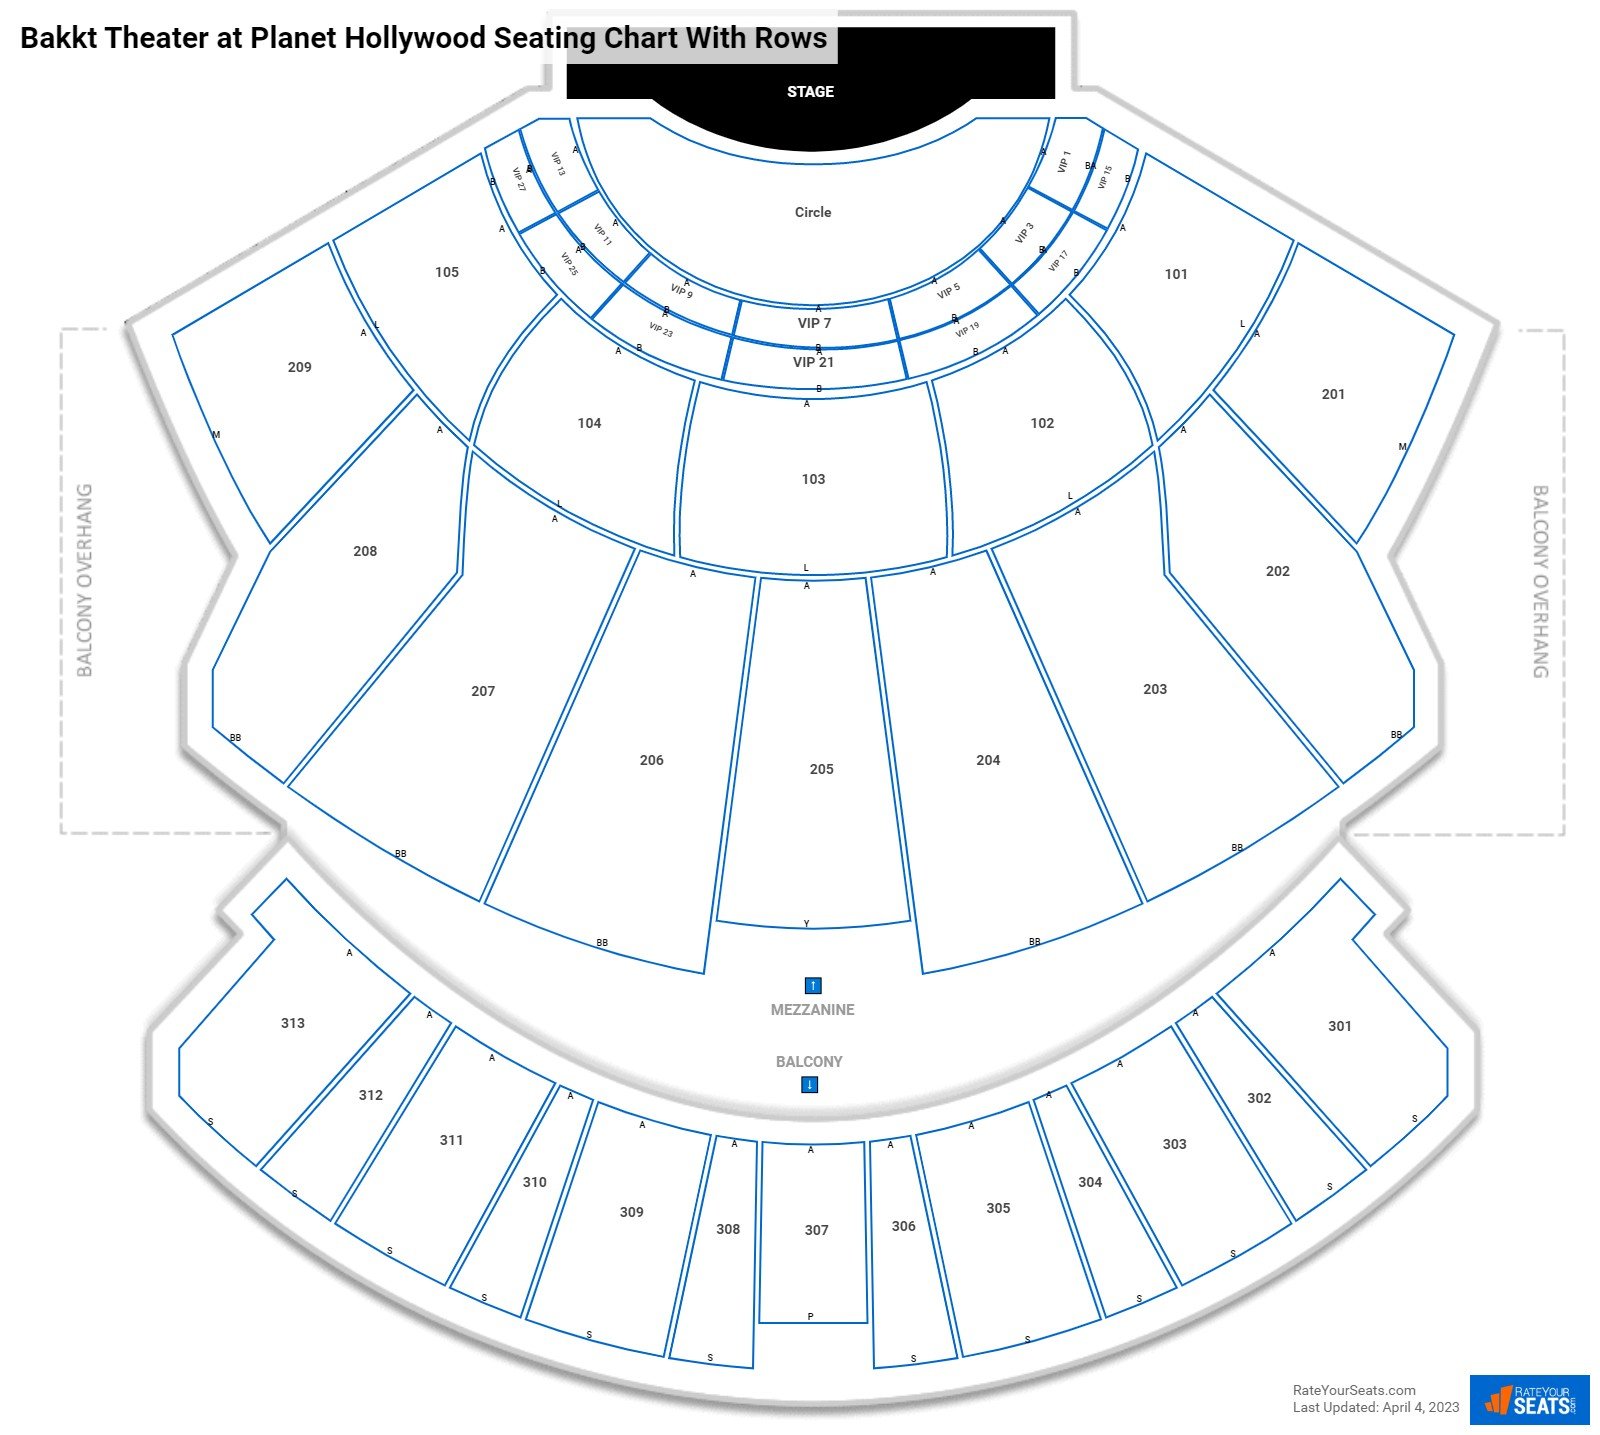 Zappos Theater (Planet Hollywood) seating chart with row numbers